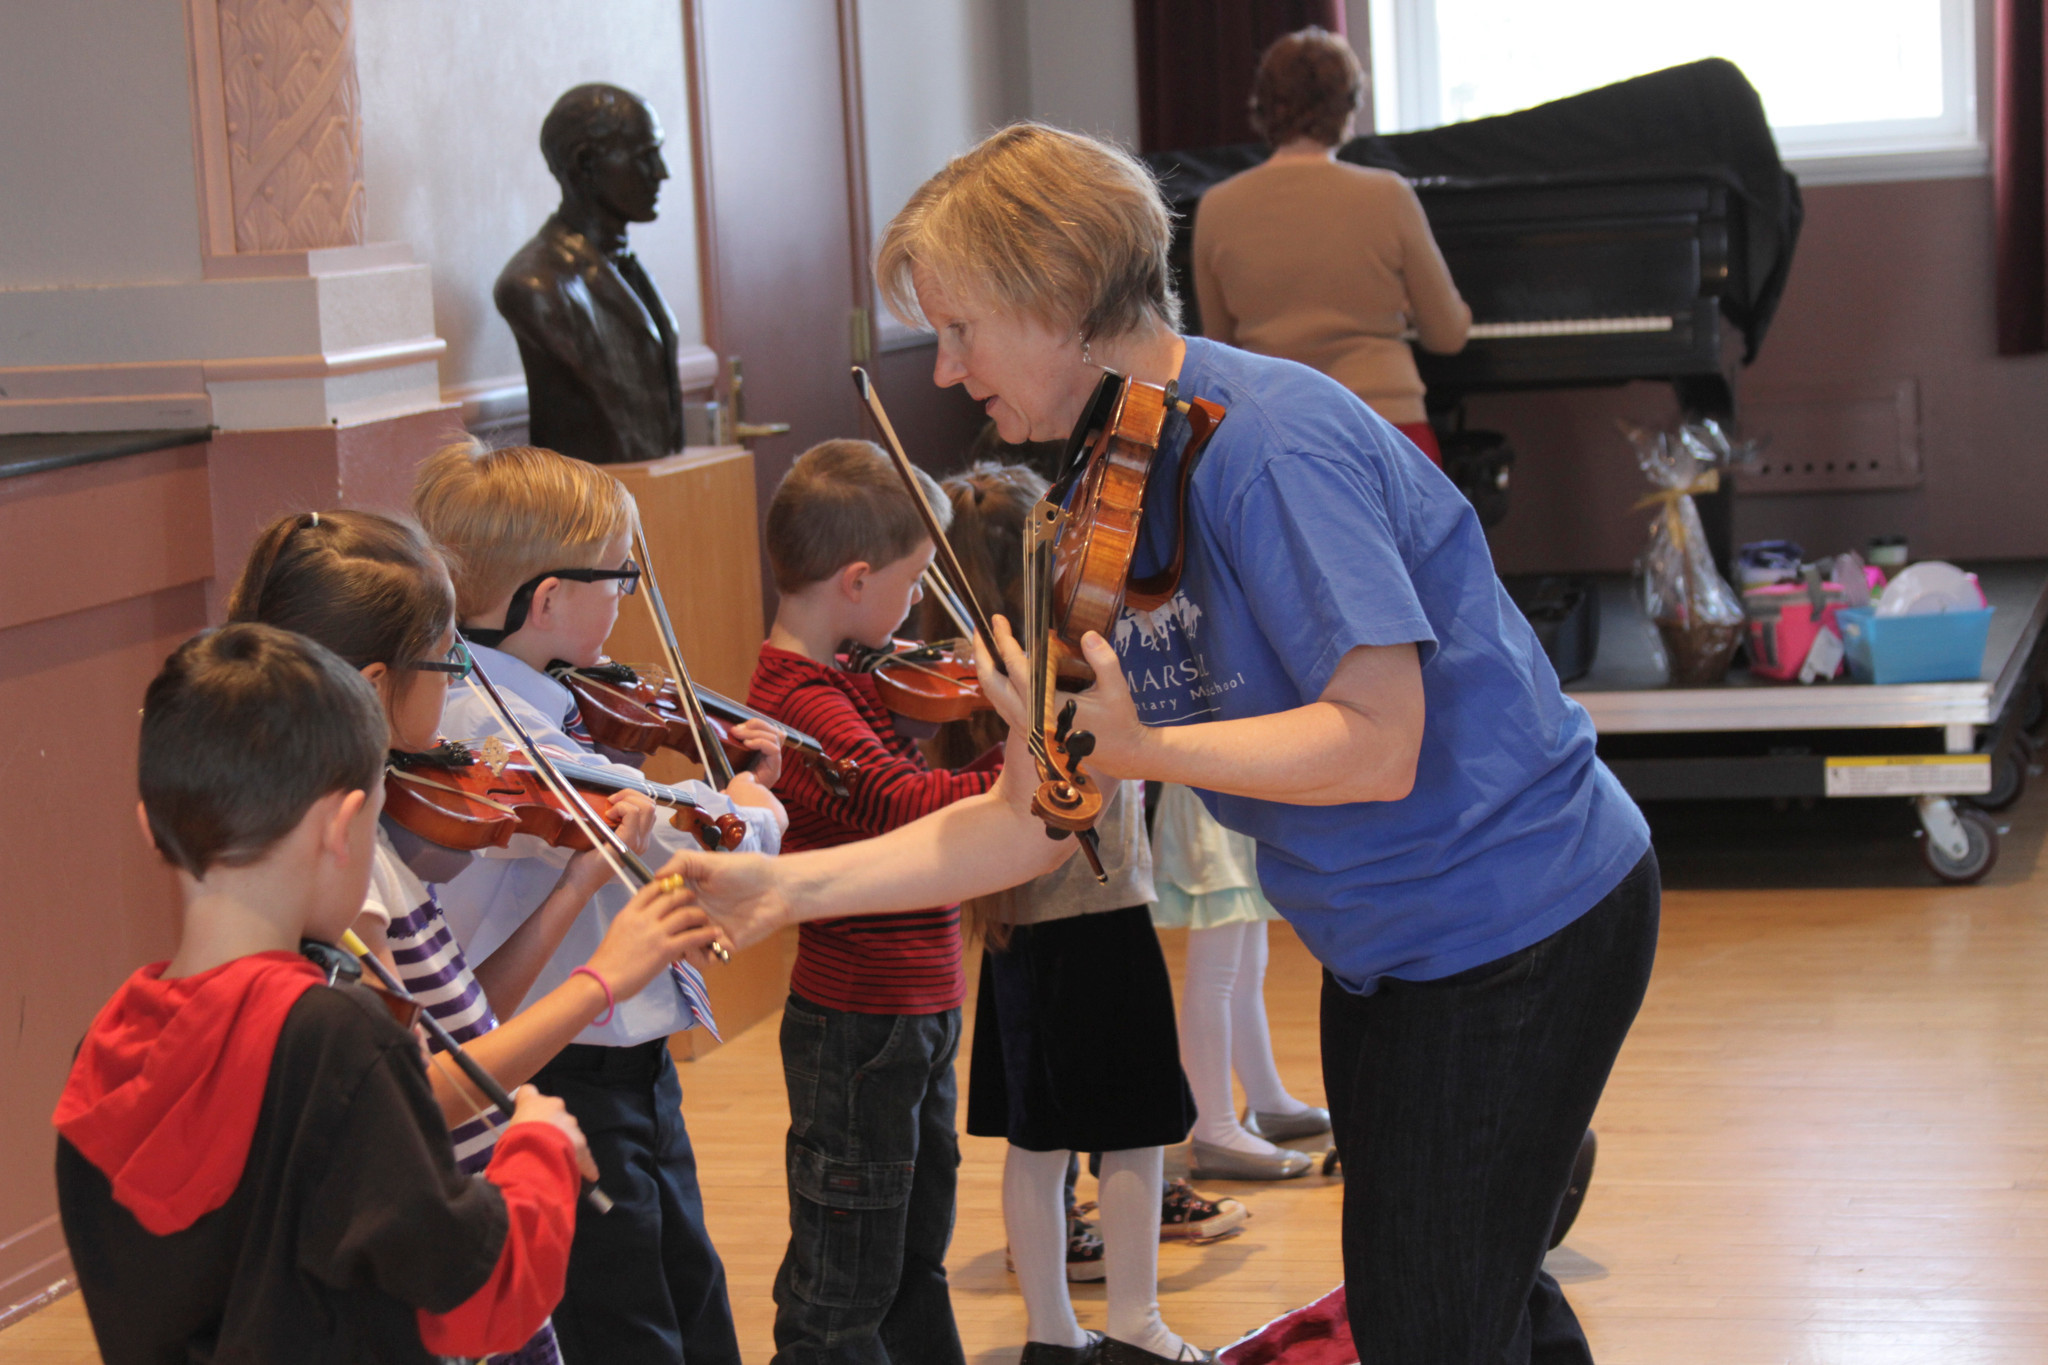 Student teacher helps with violin lessons.